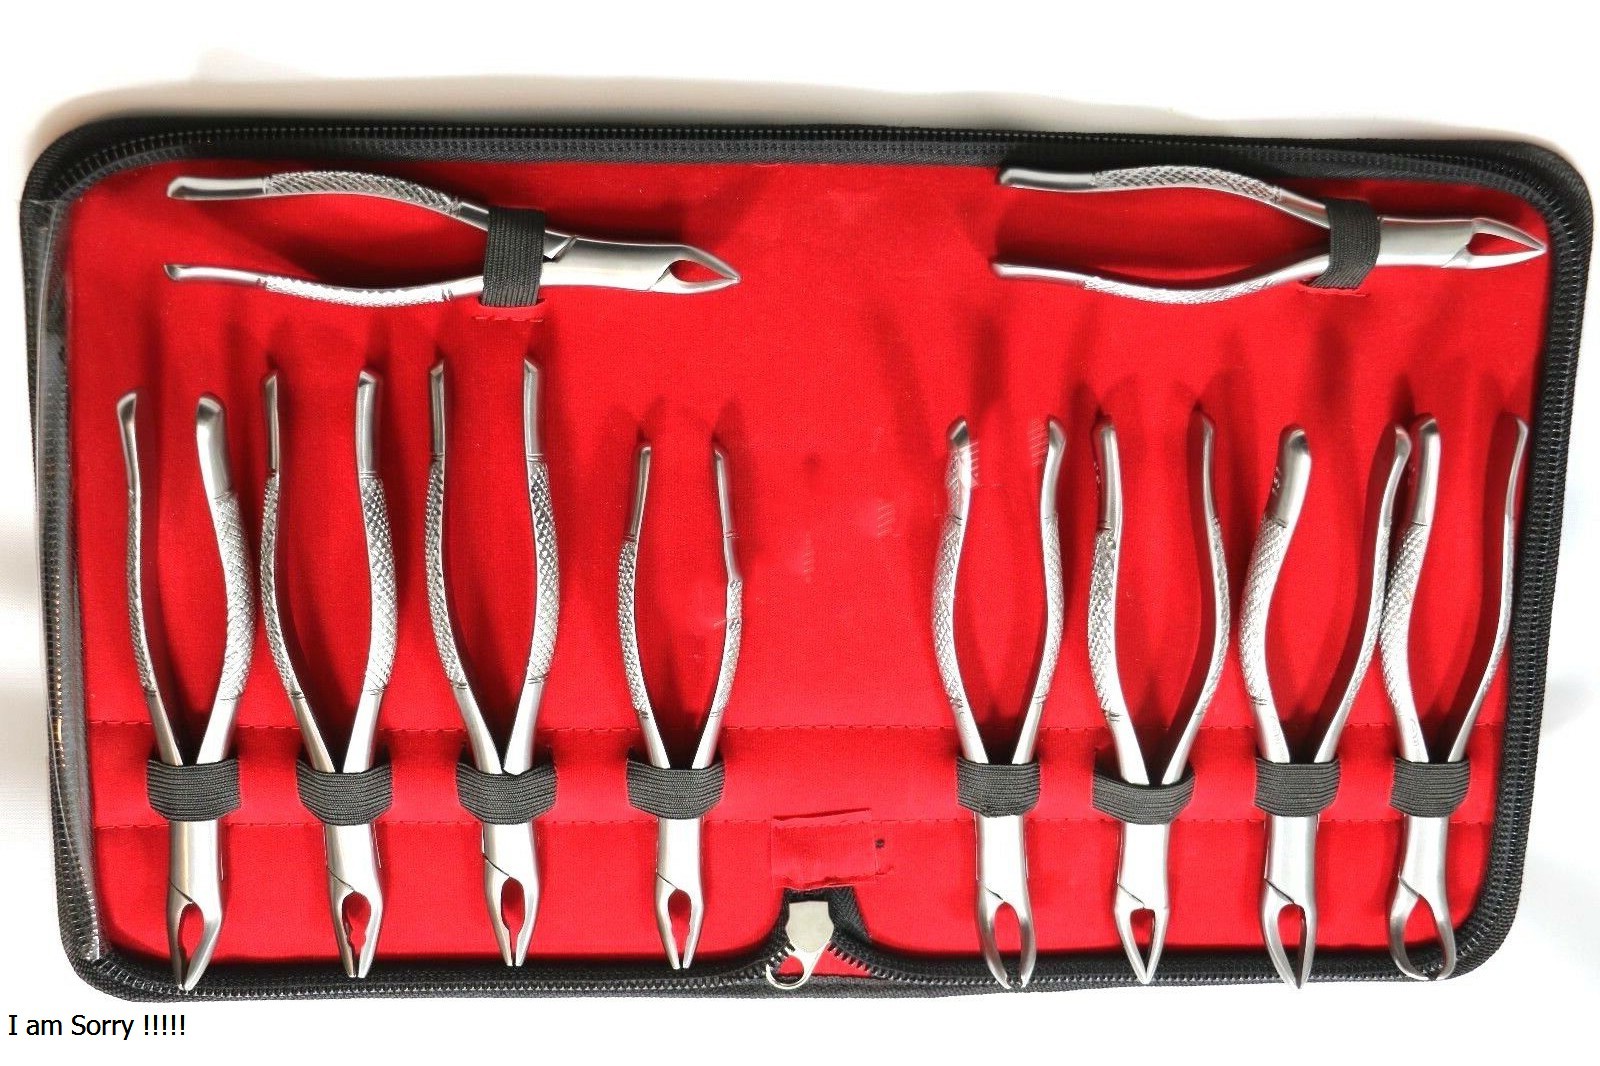 GERMAN-STAINLESS-EXTRACTING-FORCEPS-EXTRACTION-DENTAL-INSTRUMENTS-SET-OF-10-3.jpg